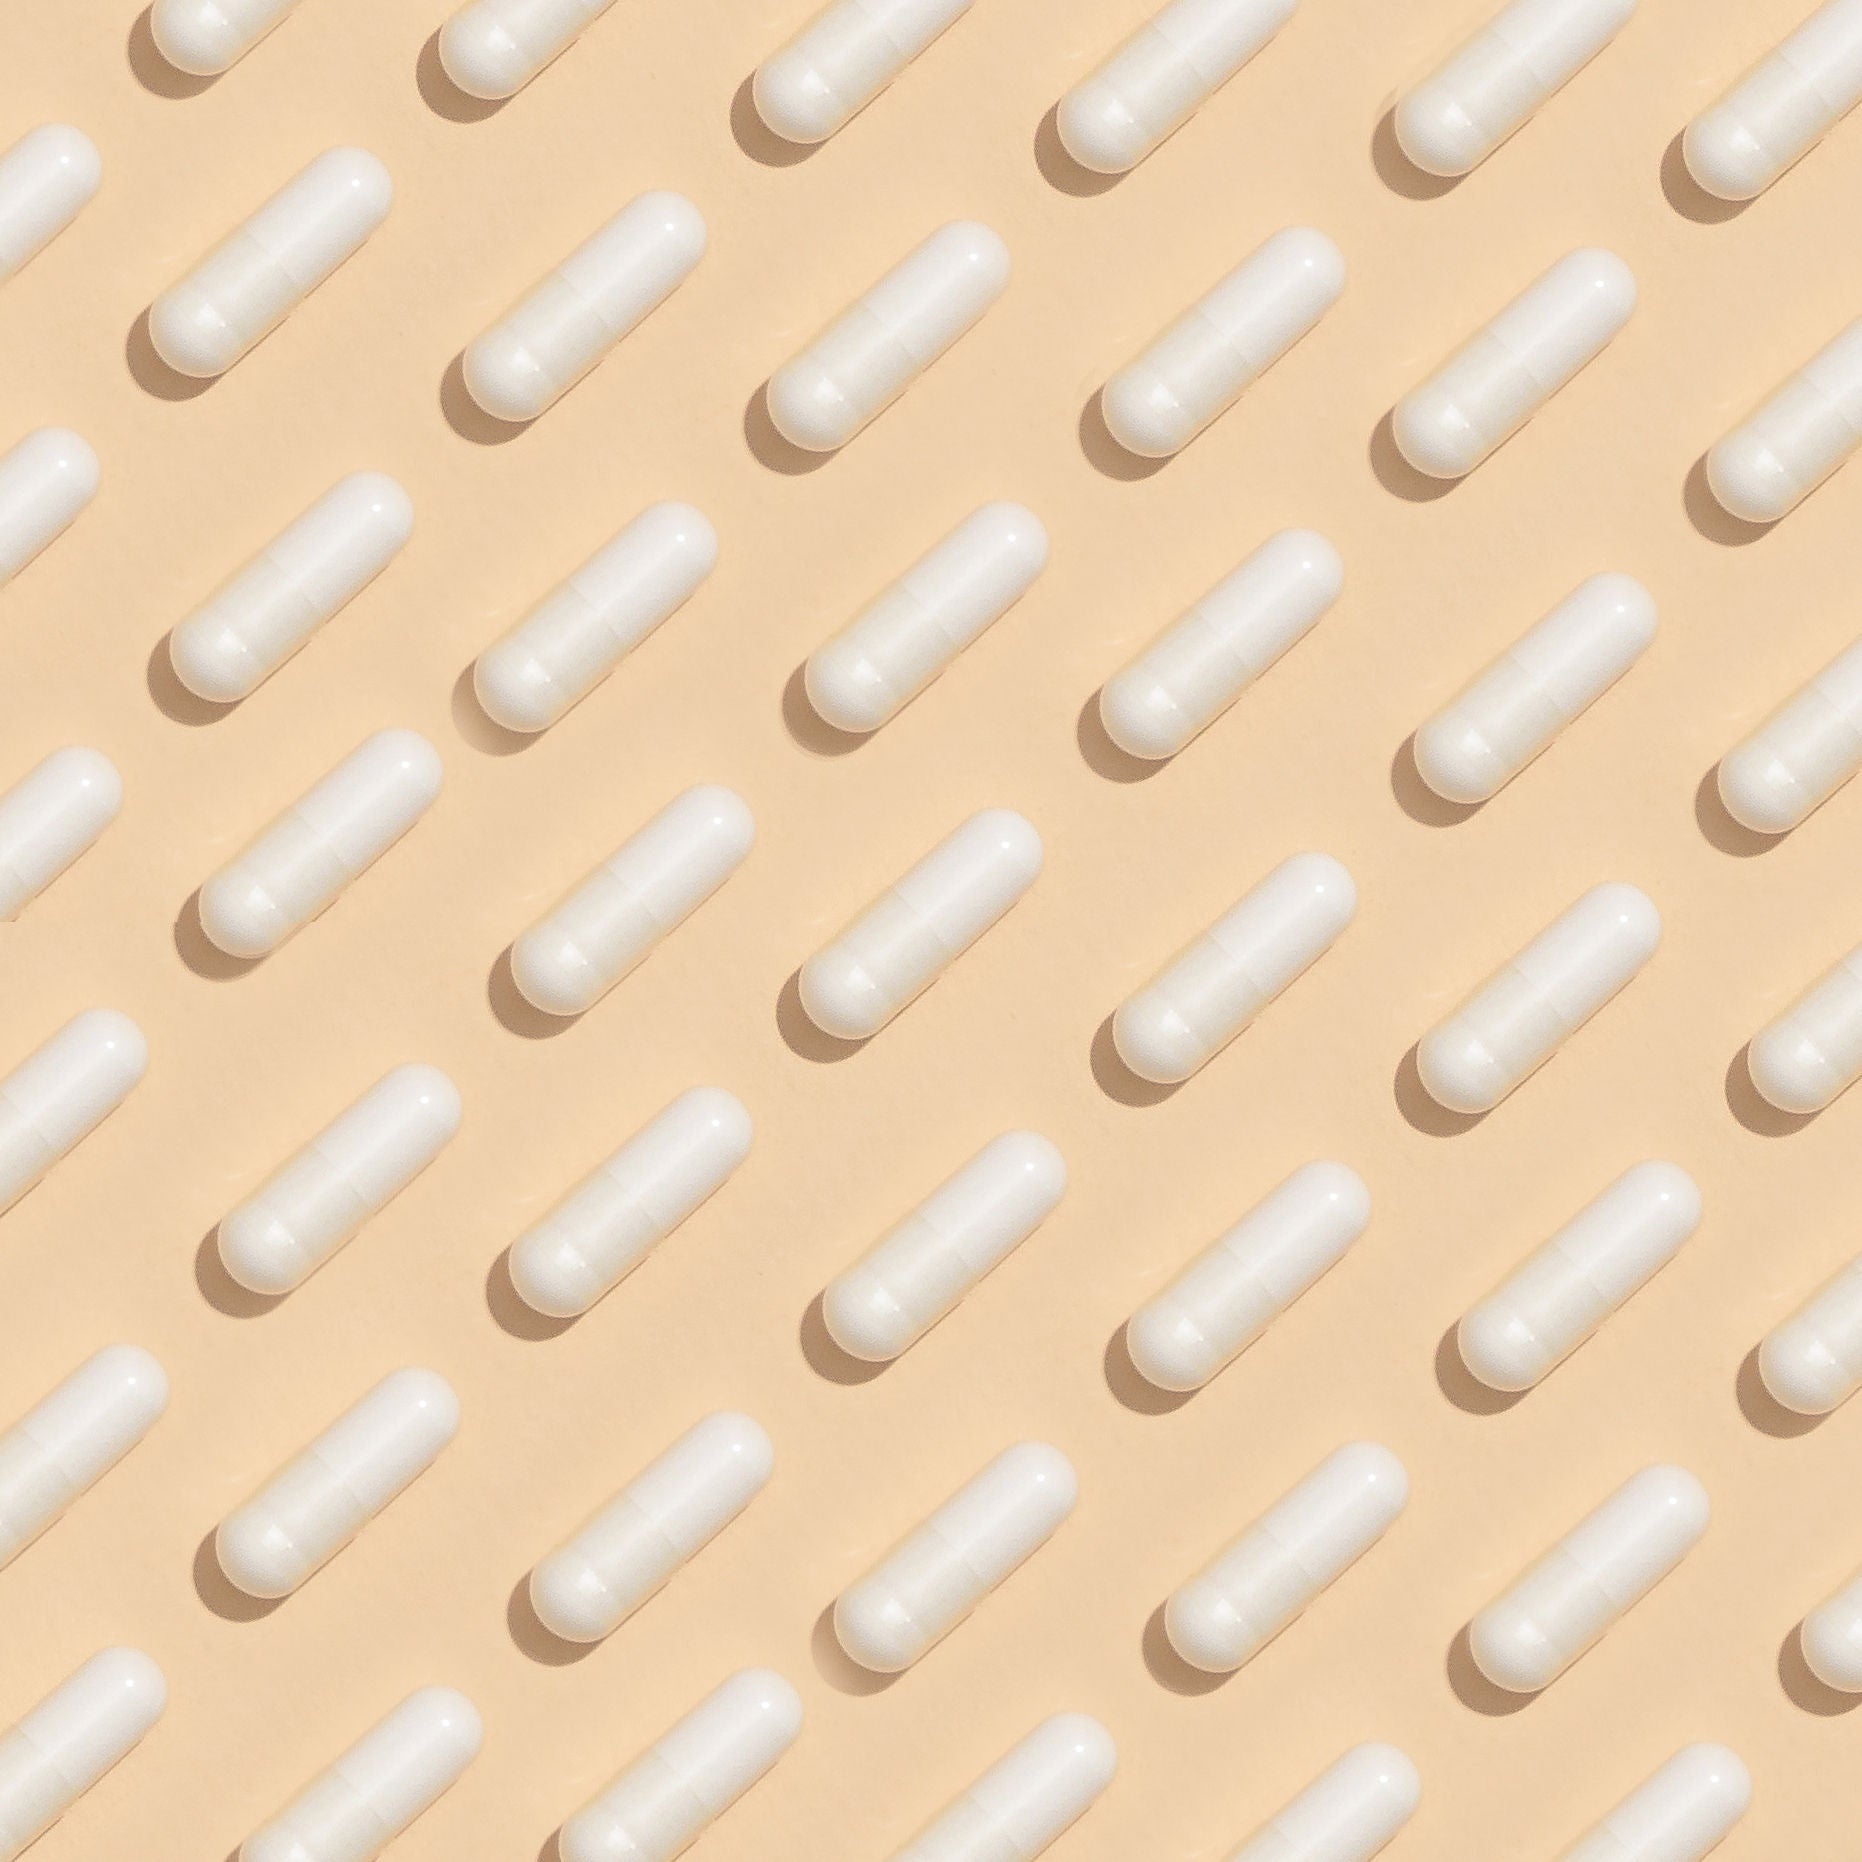 Pills laid out on a tan background in a checkerboard pattern.